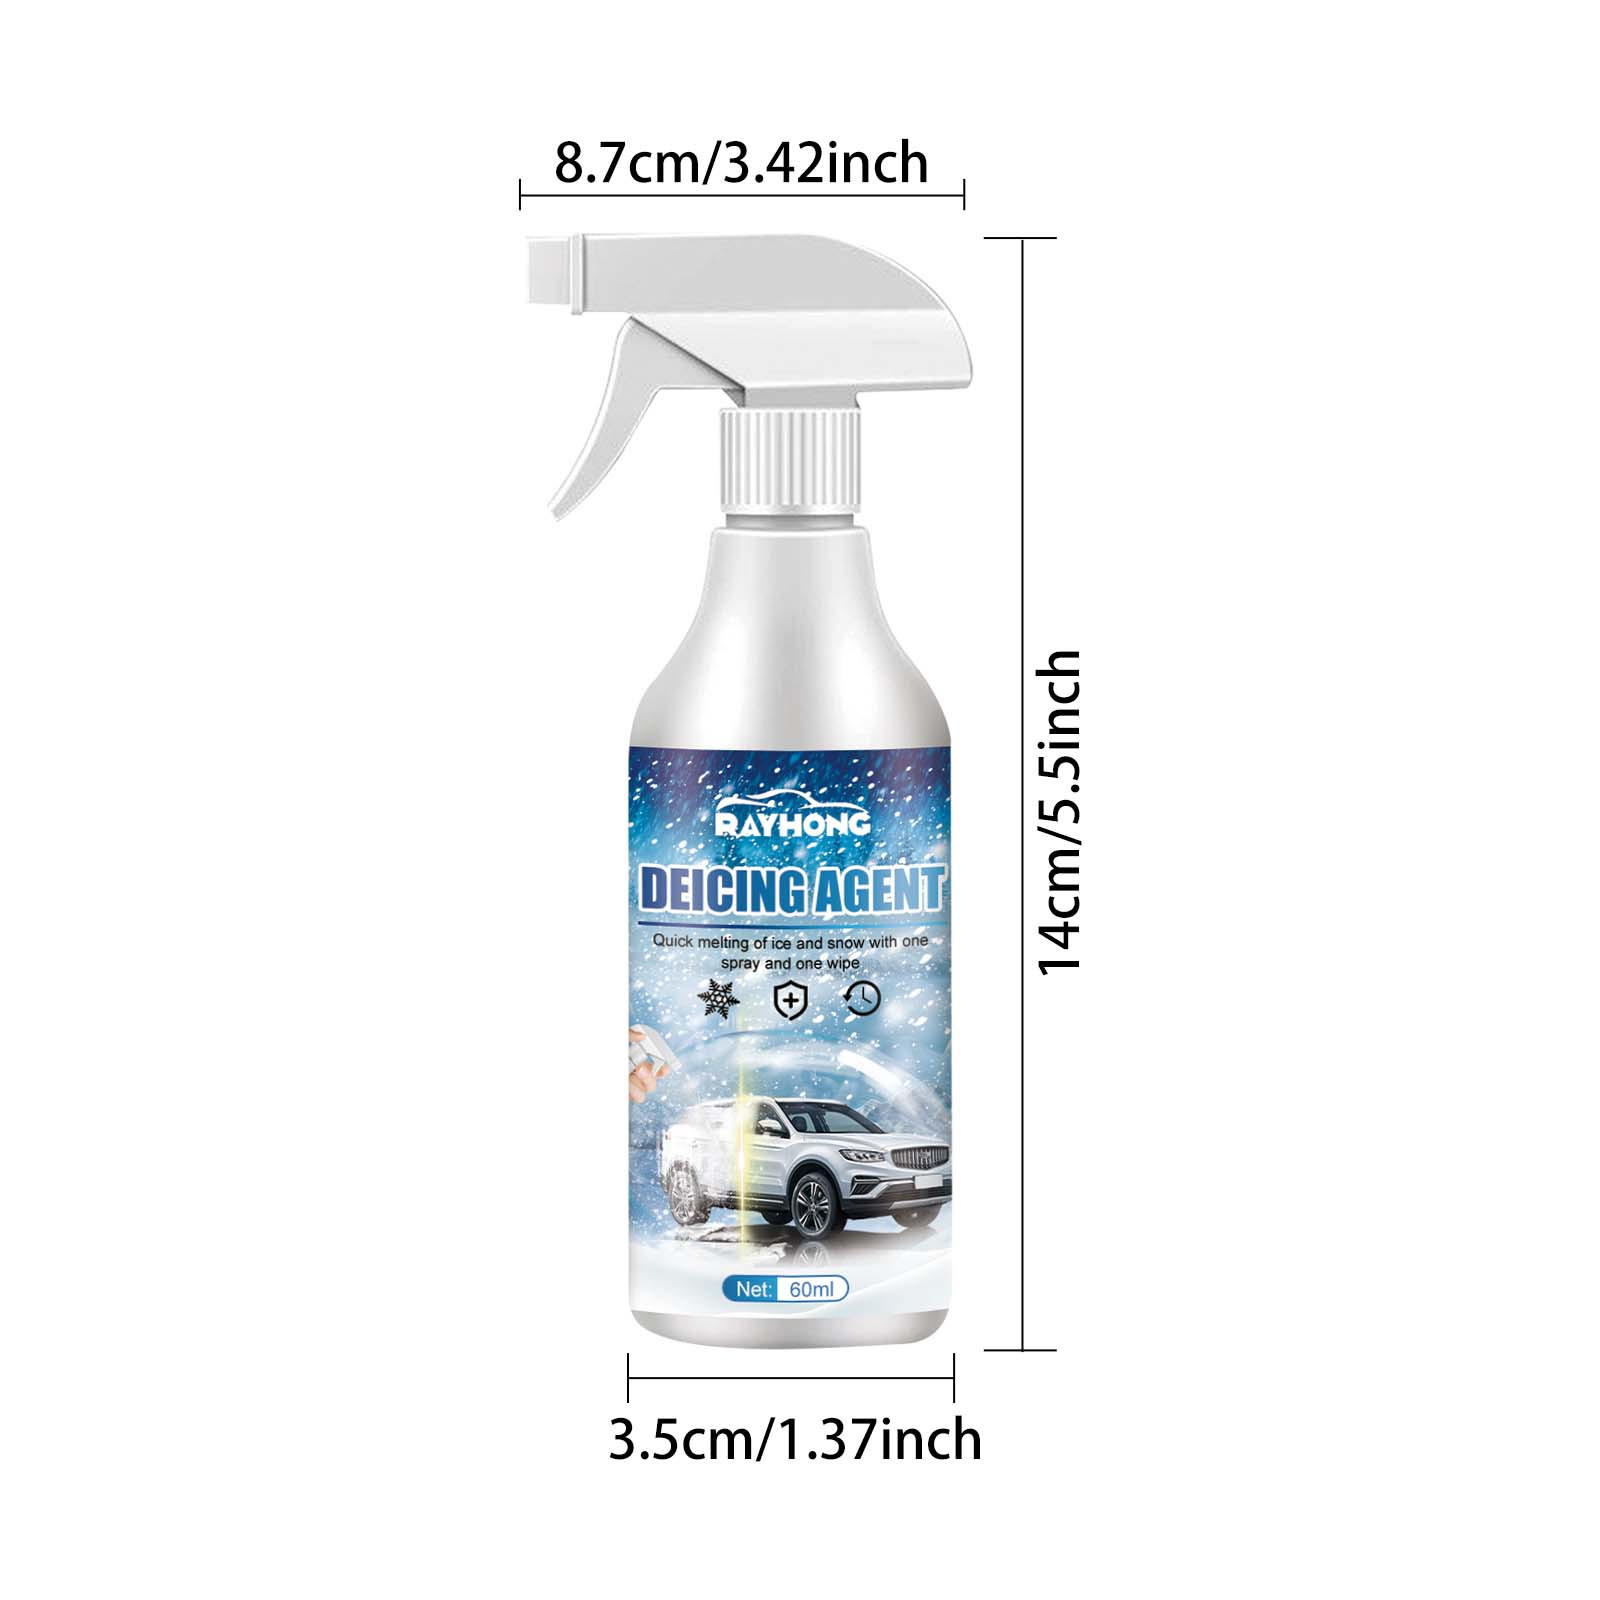 Sdjma Deicer Spray for Car Windshield Windows Wipers and Mirrors - Winter Car Essentials - Auto Windshield Defroster Deicing Spray - Fast Ice & Snow